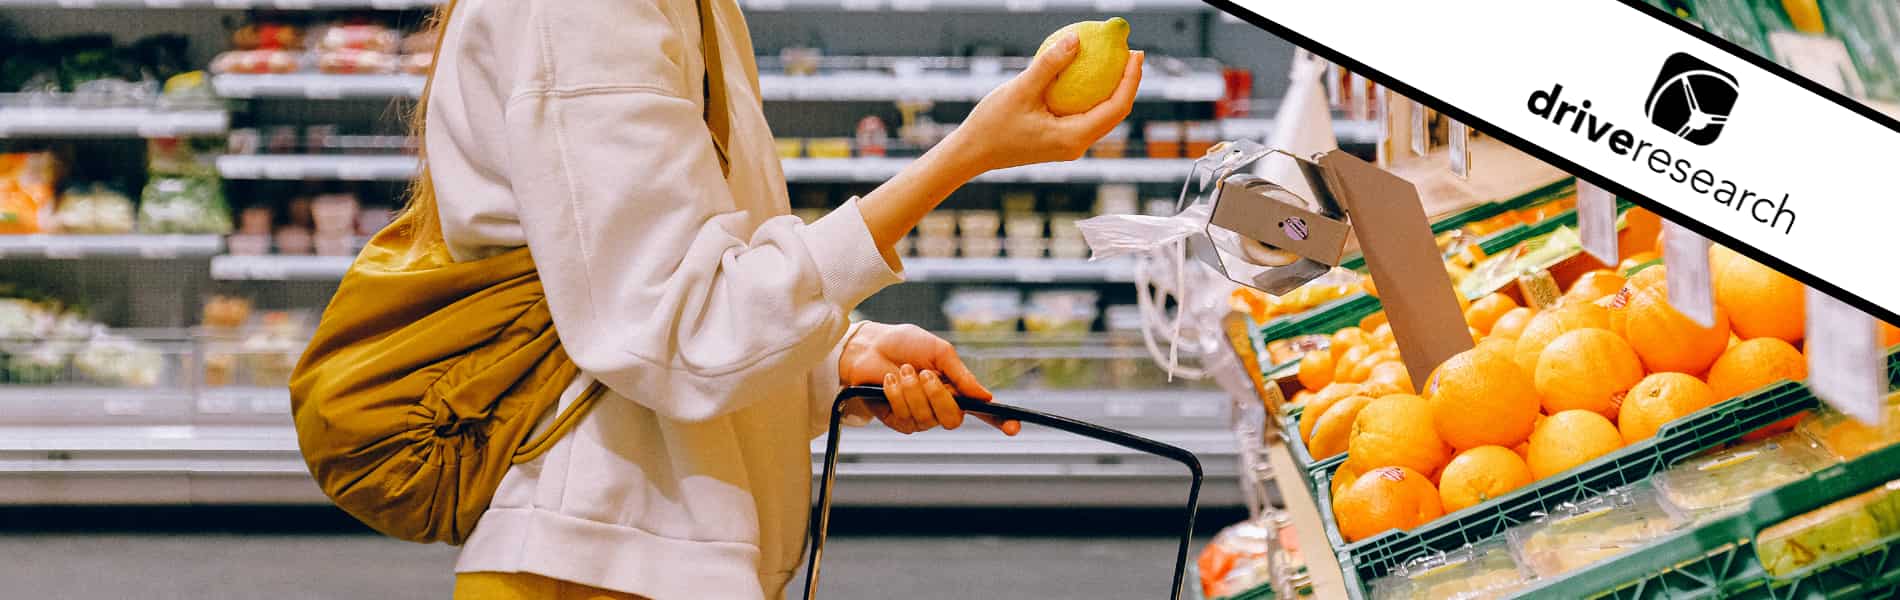 woman at grocery store looking at lemons